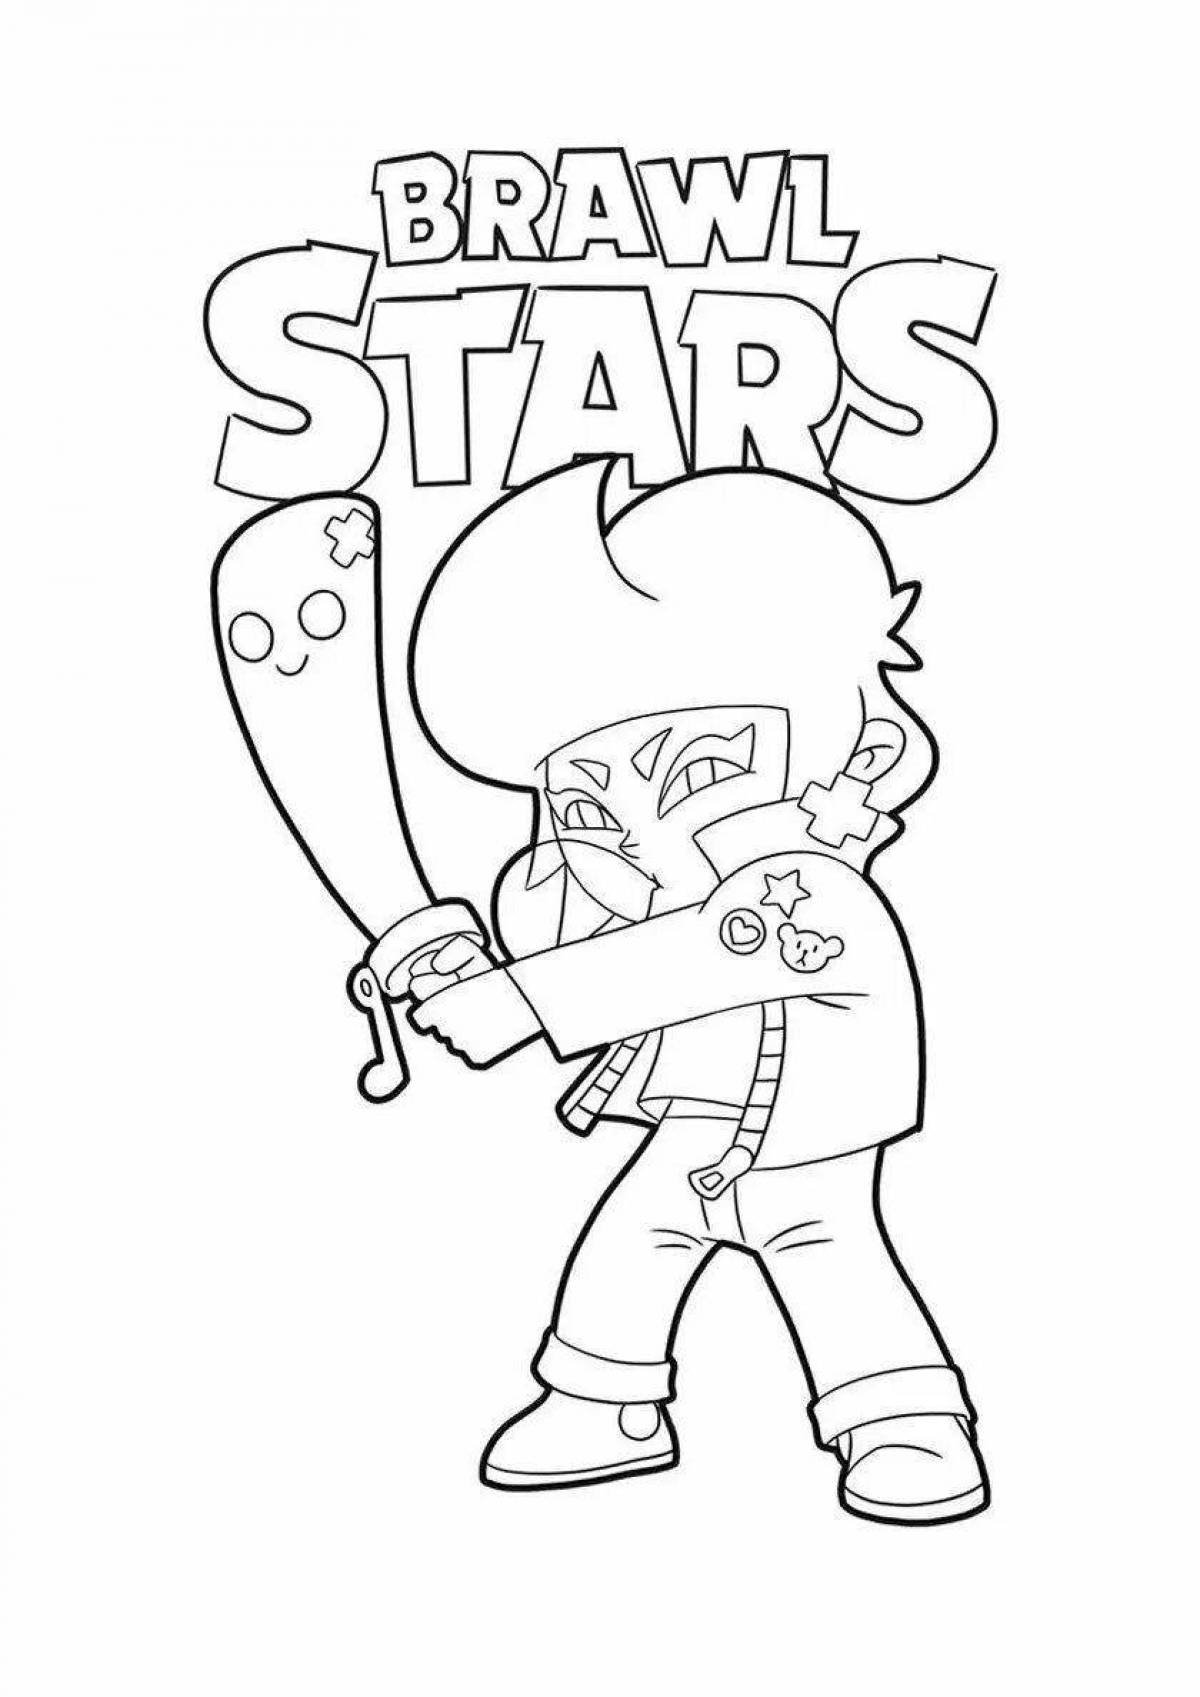 Exciting coloring pages with bravo stars stickers